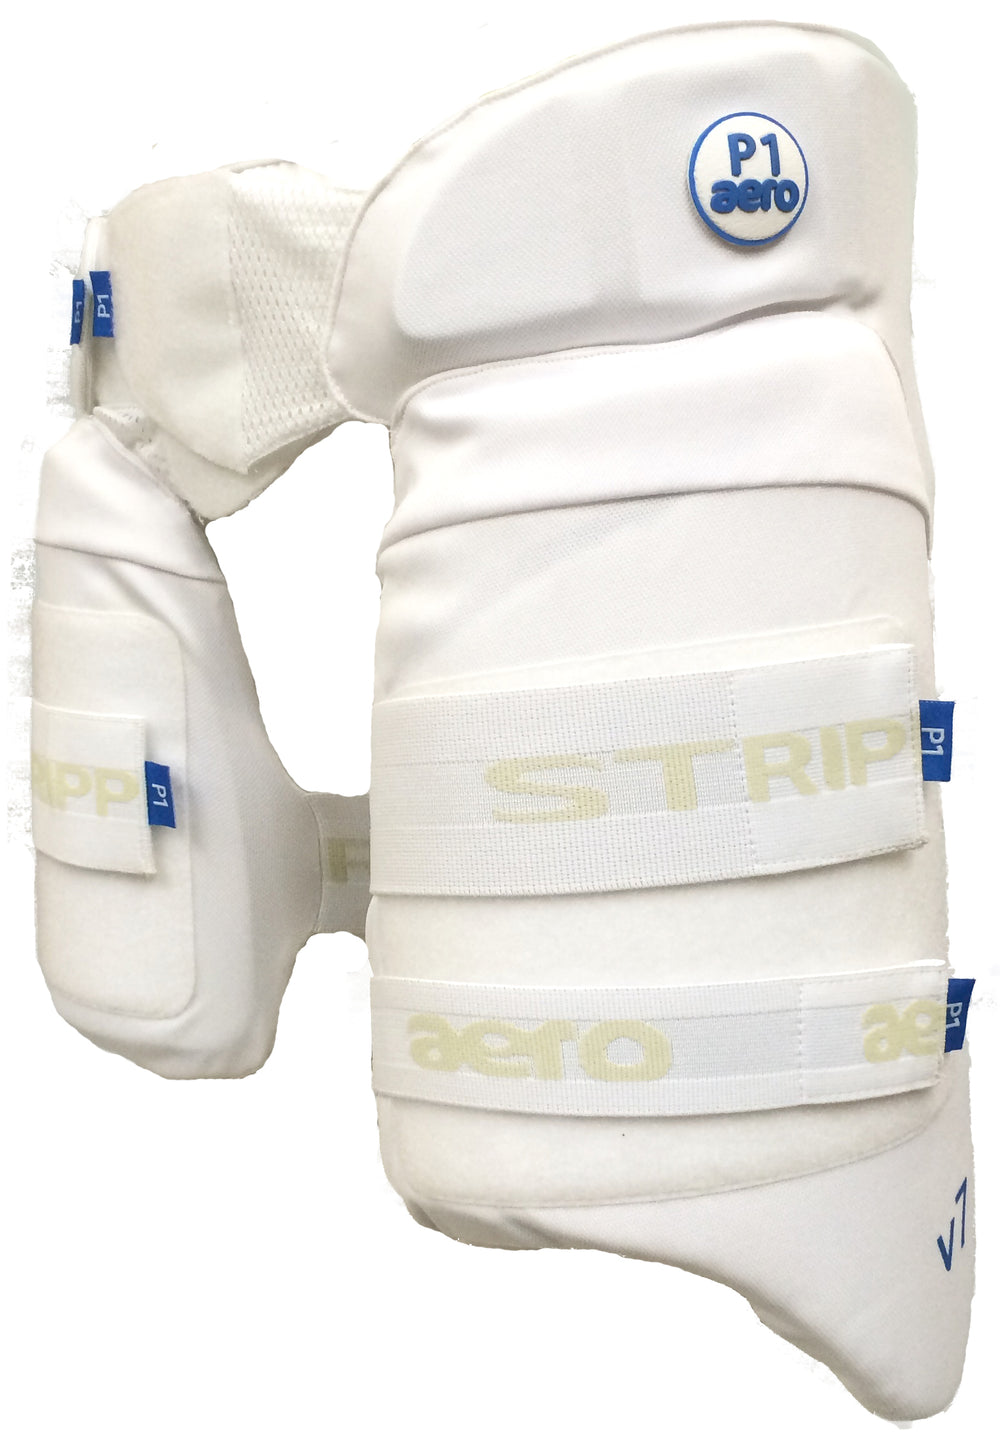 Aero P1 Strippers V7 - Lower Body Protector